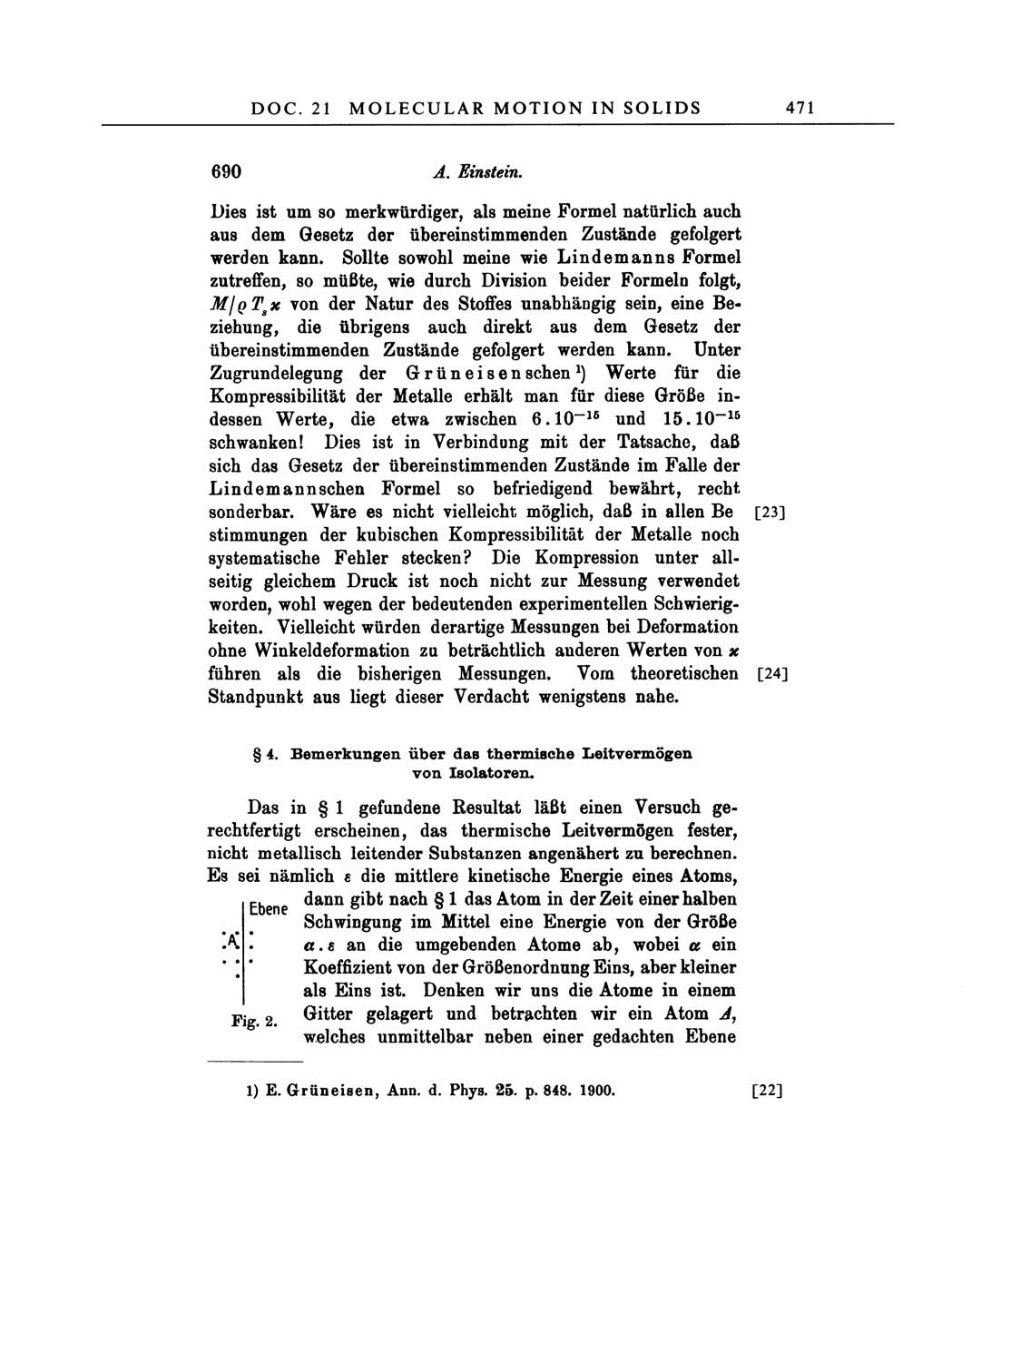 Volume 3: The Swiss Years: Writings 1909-1911 page 471